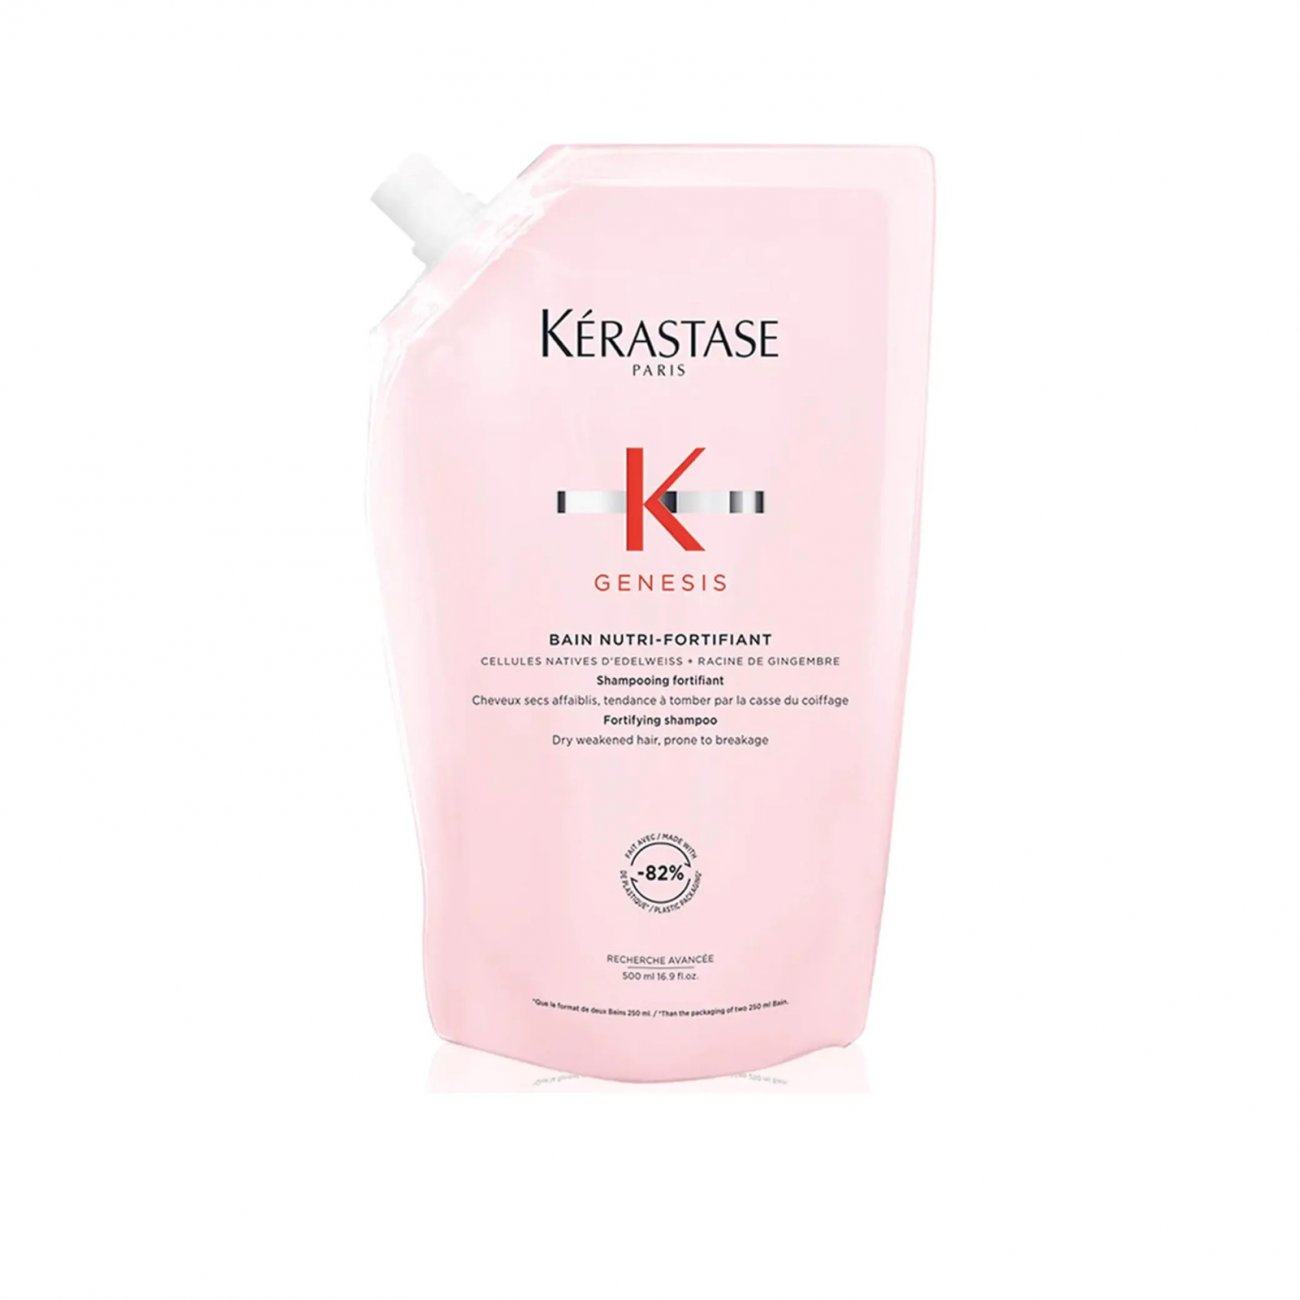 Genesis Homme by Kérastase  Product Review  MENS STYLE BLOG